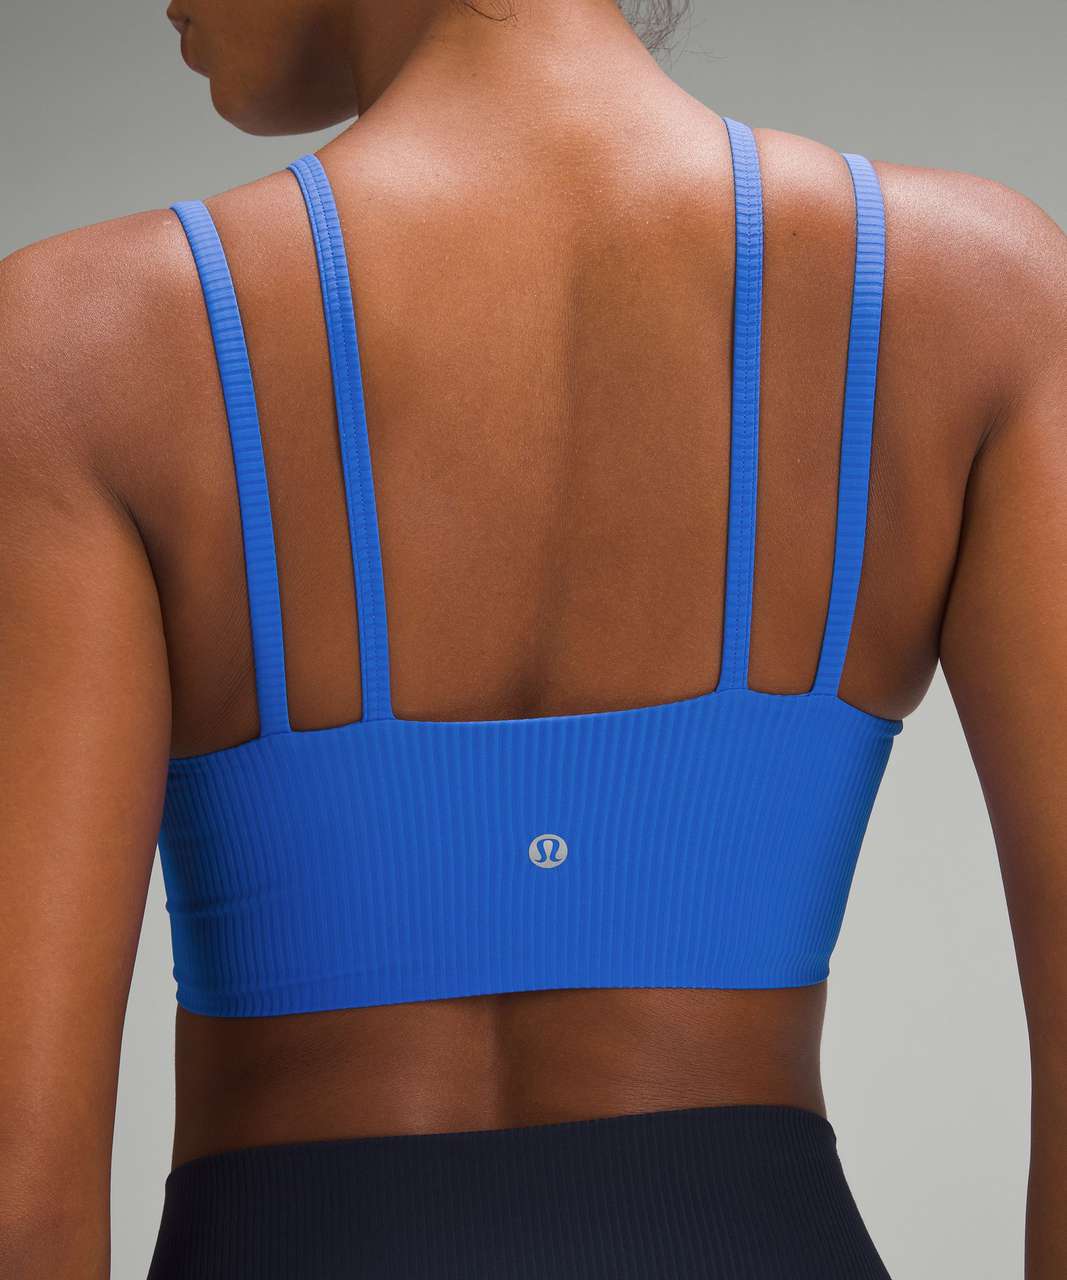 Lululemon Like a Cloud Strappy Longline Ribbed Bra *Light Support, B/C Cup - Pipe Dream Blue